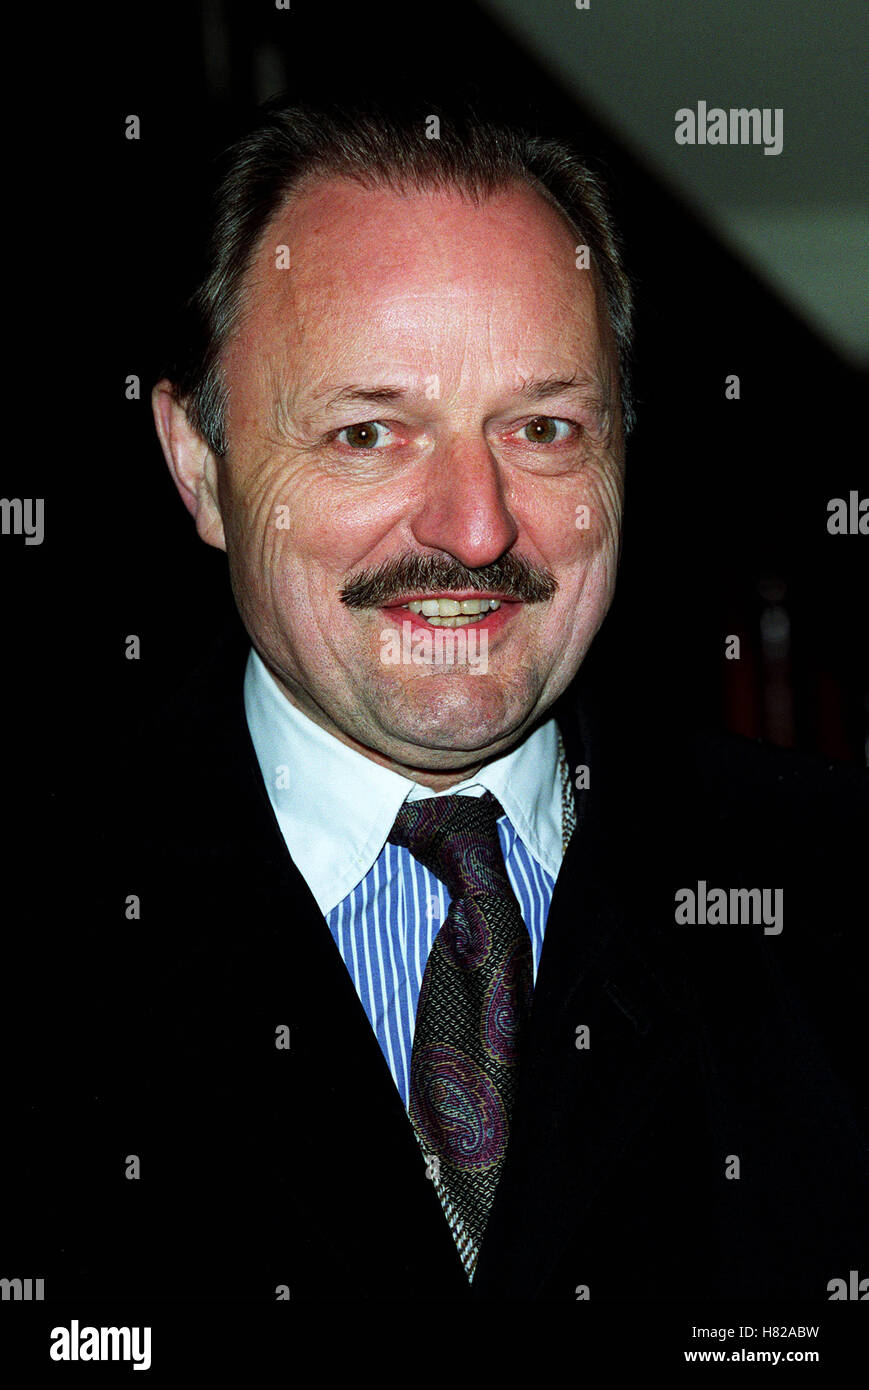 PETER BOWLES LONDON ENGLAND 26 March 2000 Stock Photo